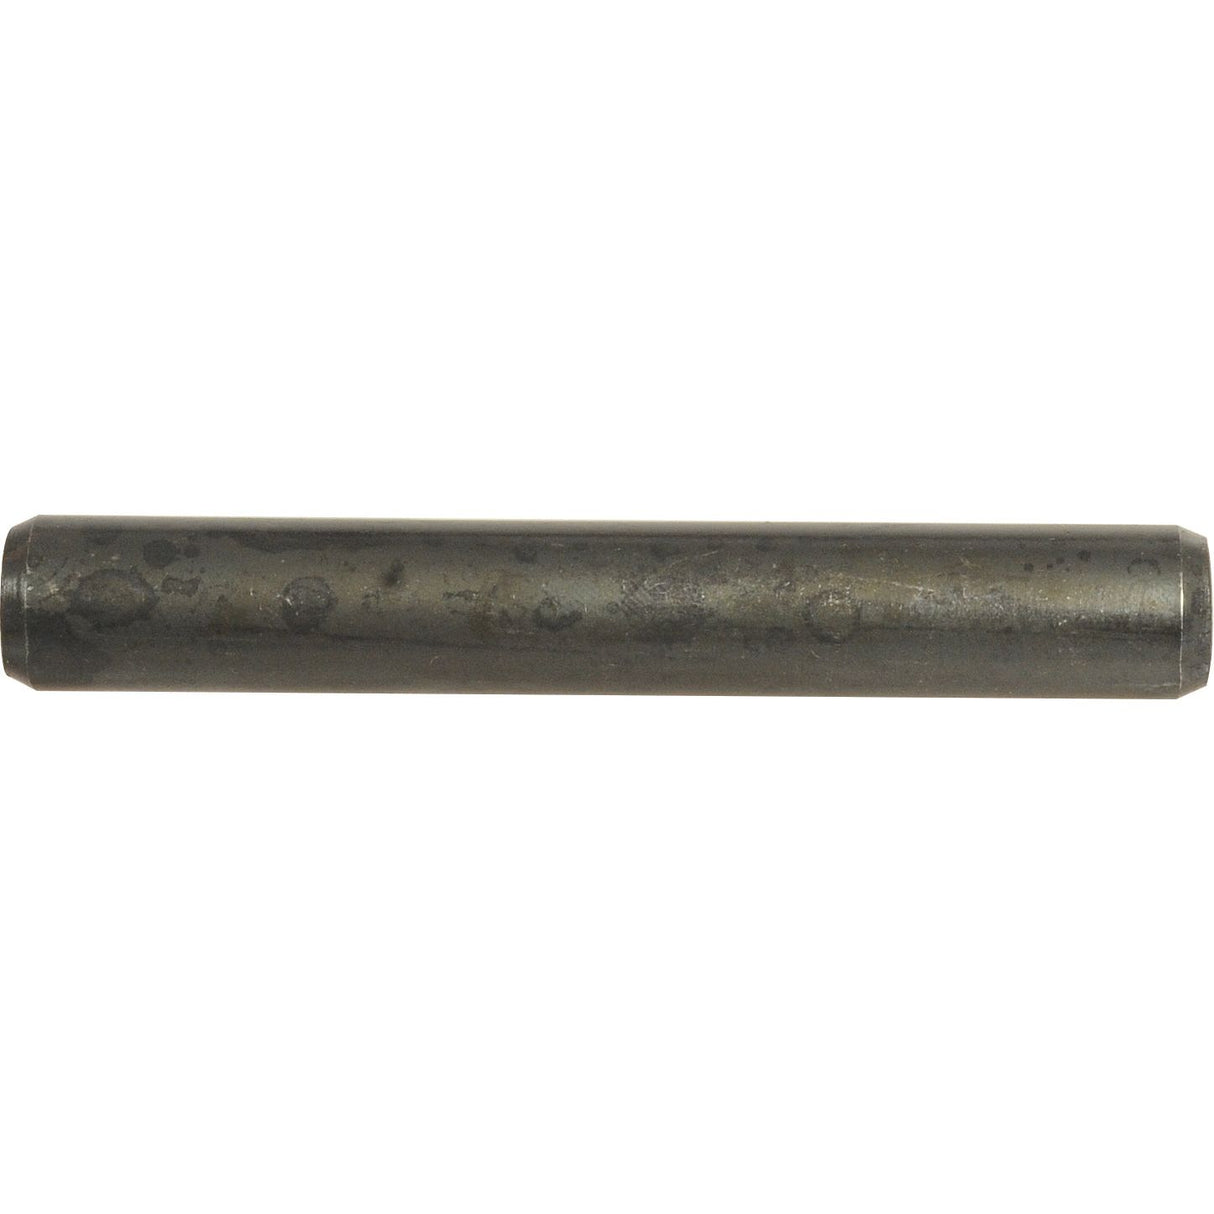 Imperial Roll Pin, Pin ⌀5/16'' x 2 1/2'' - S.1142 - Farming Parts